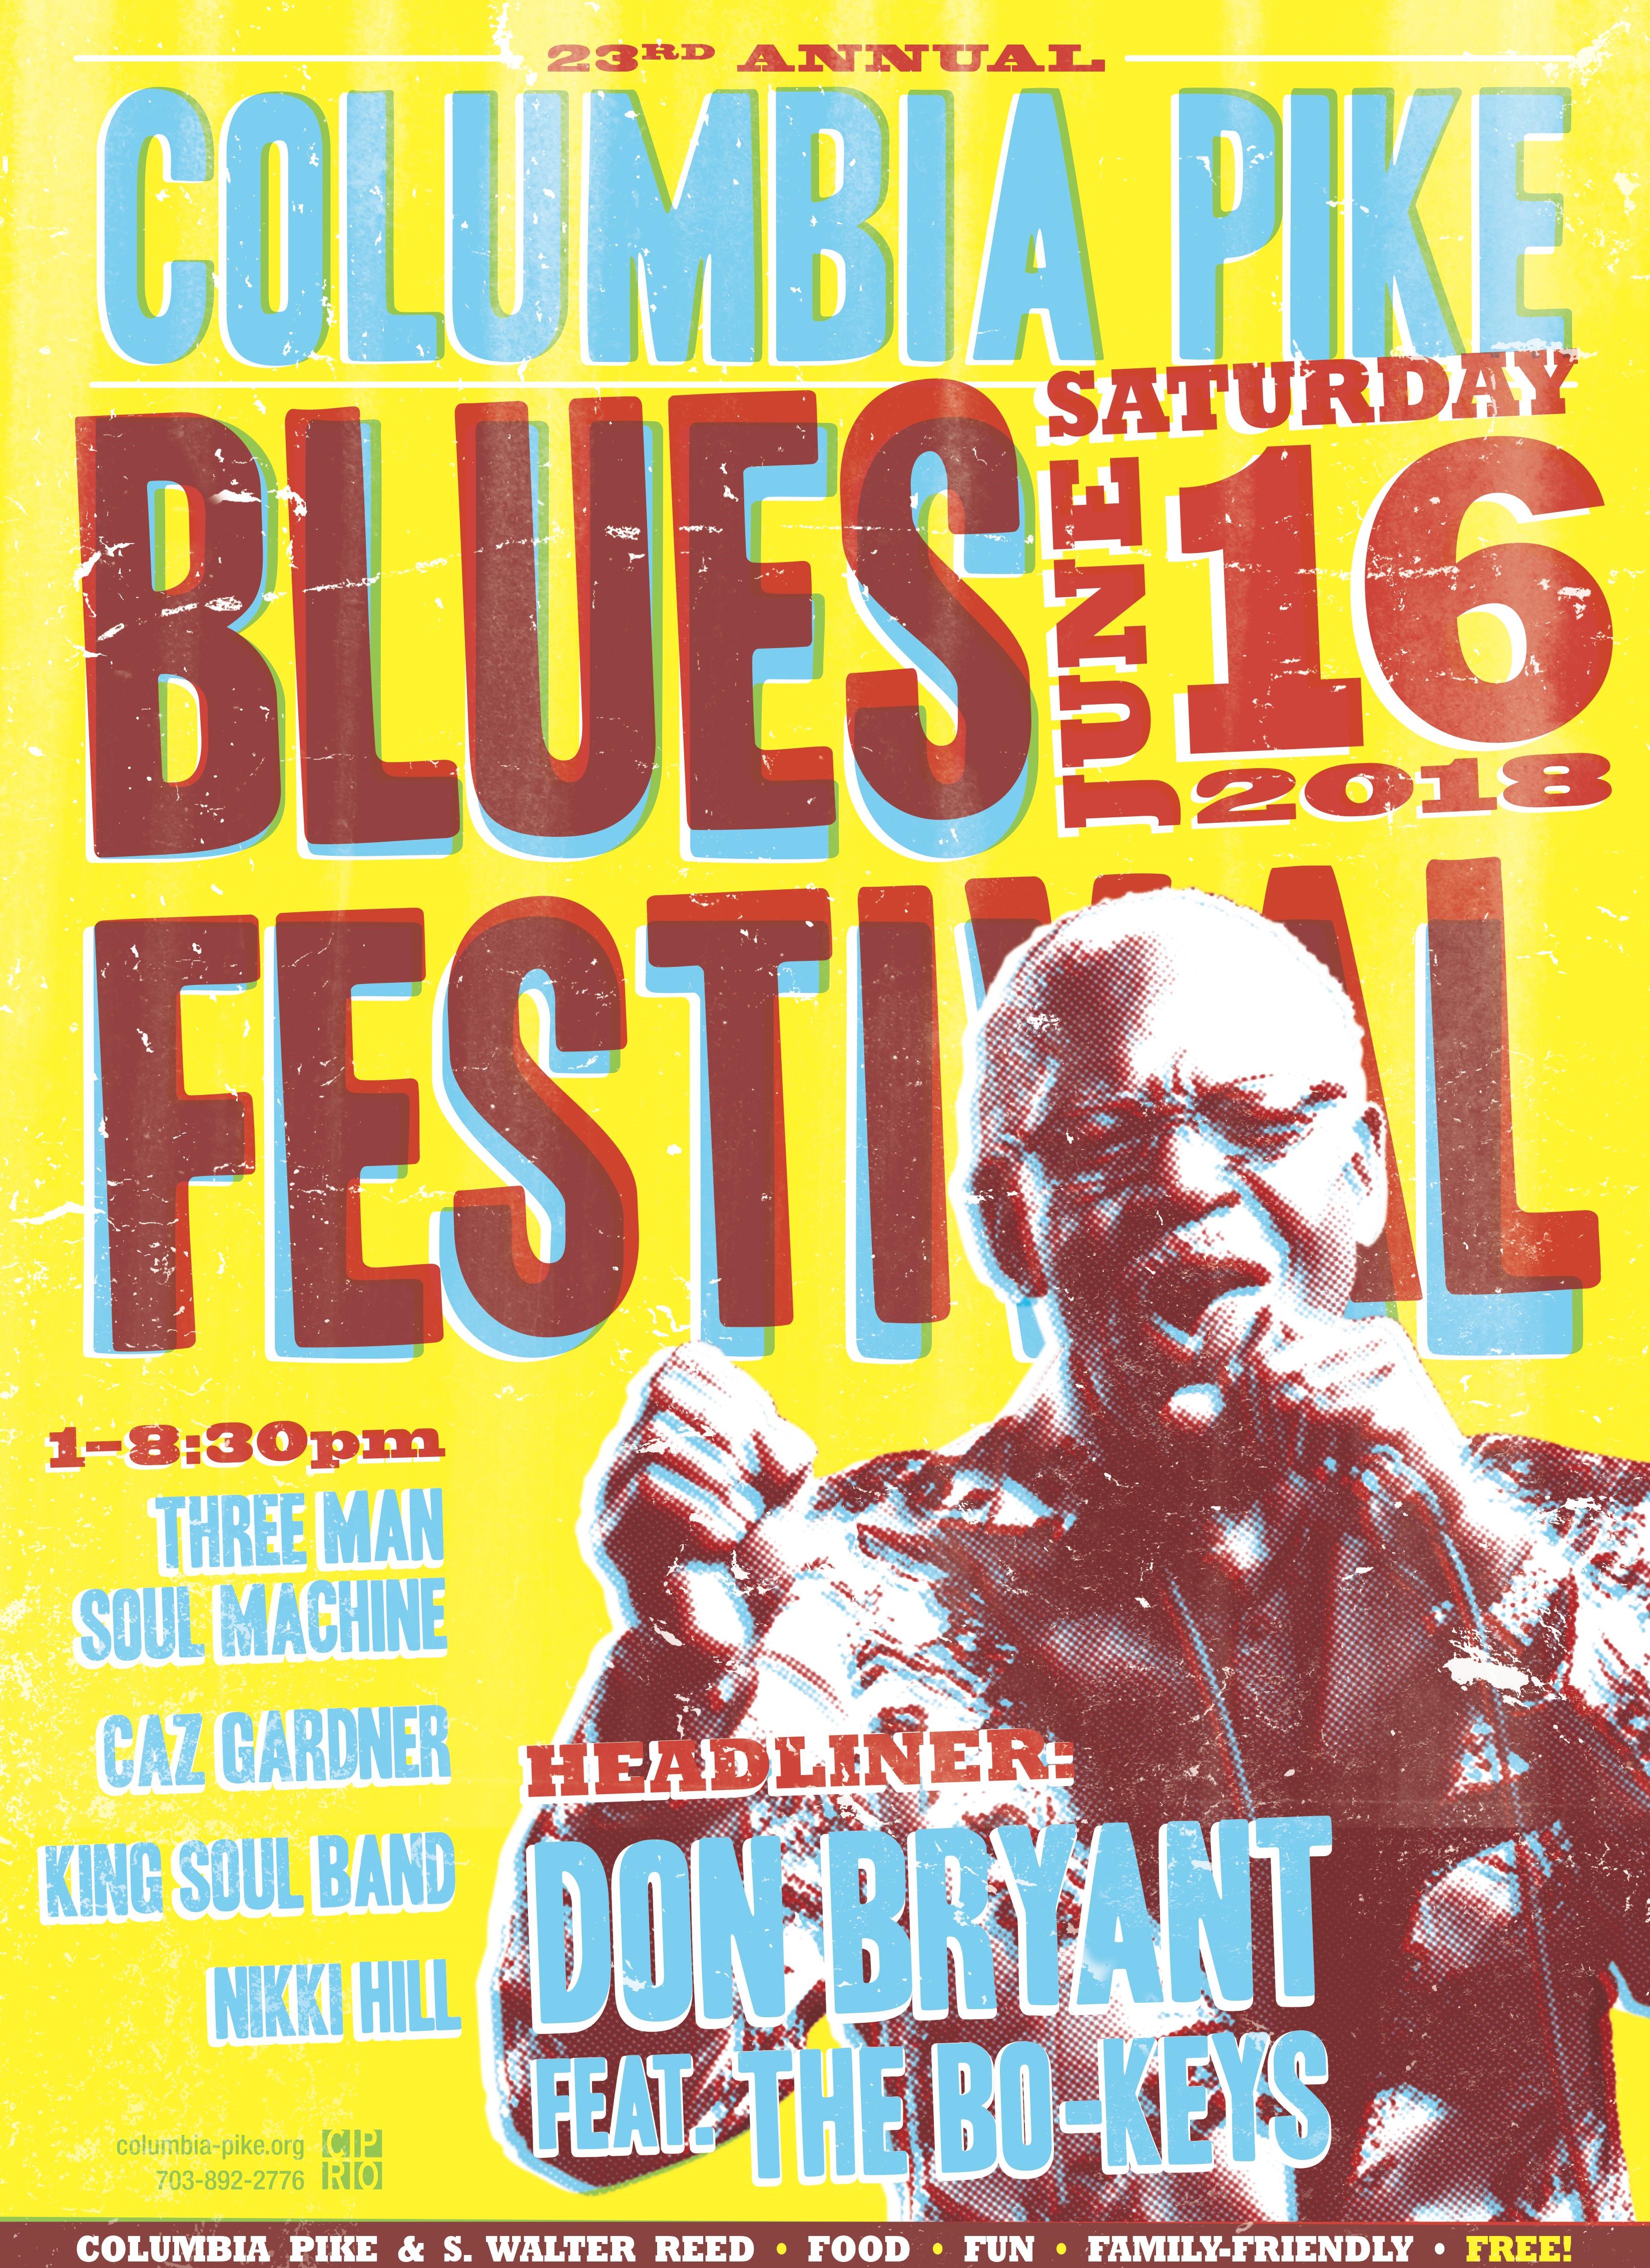 Save the Date 23rd Annual Columbia Pike Blues Festival on June 16